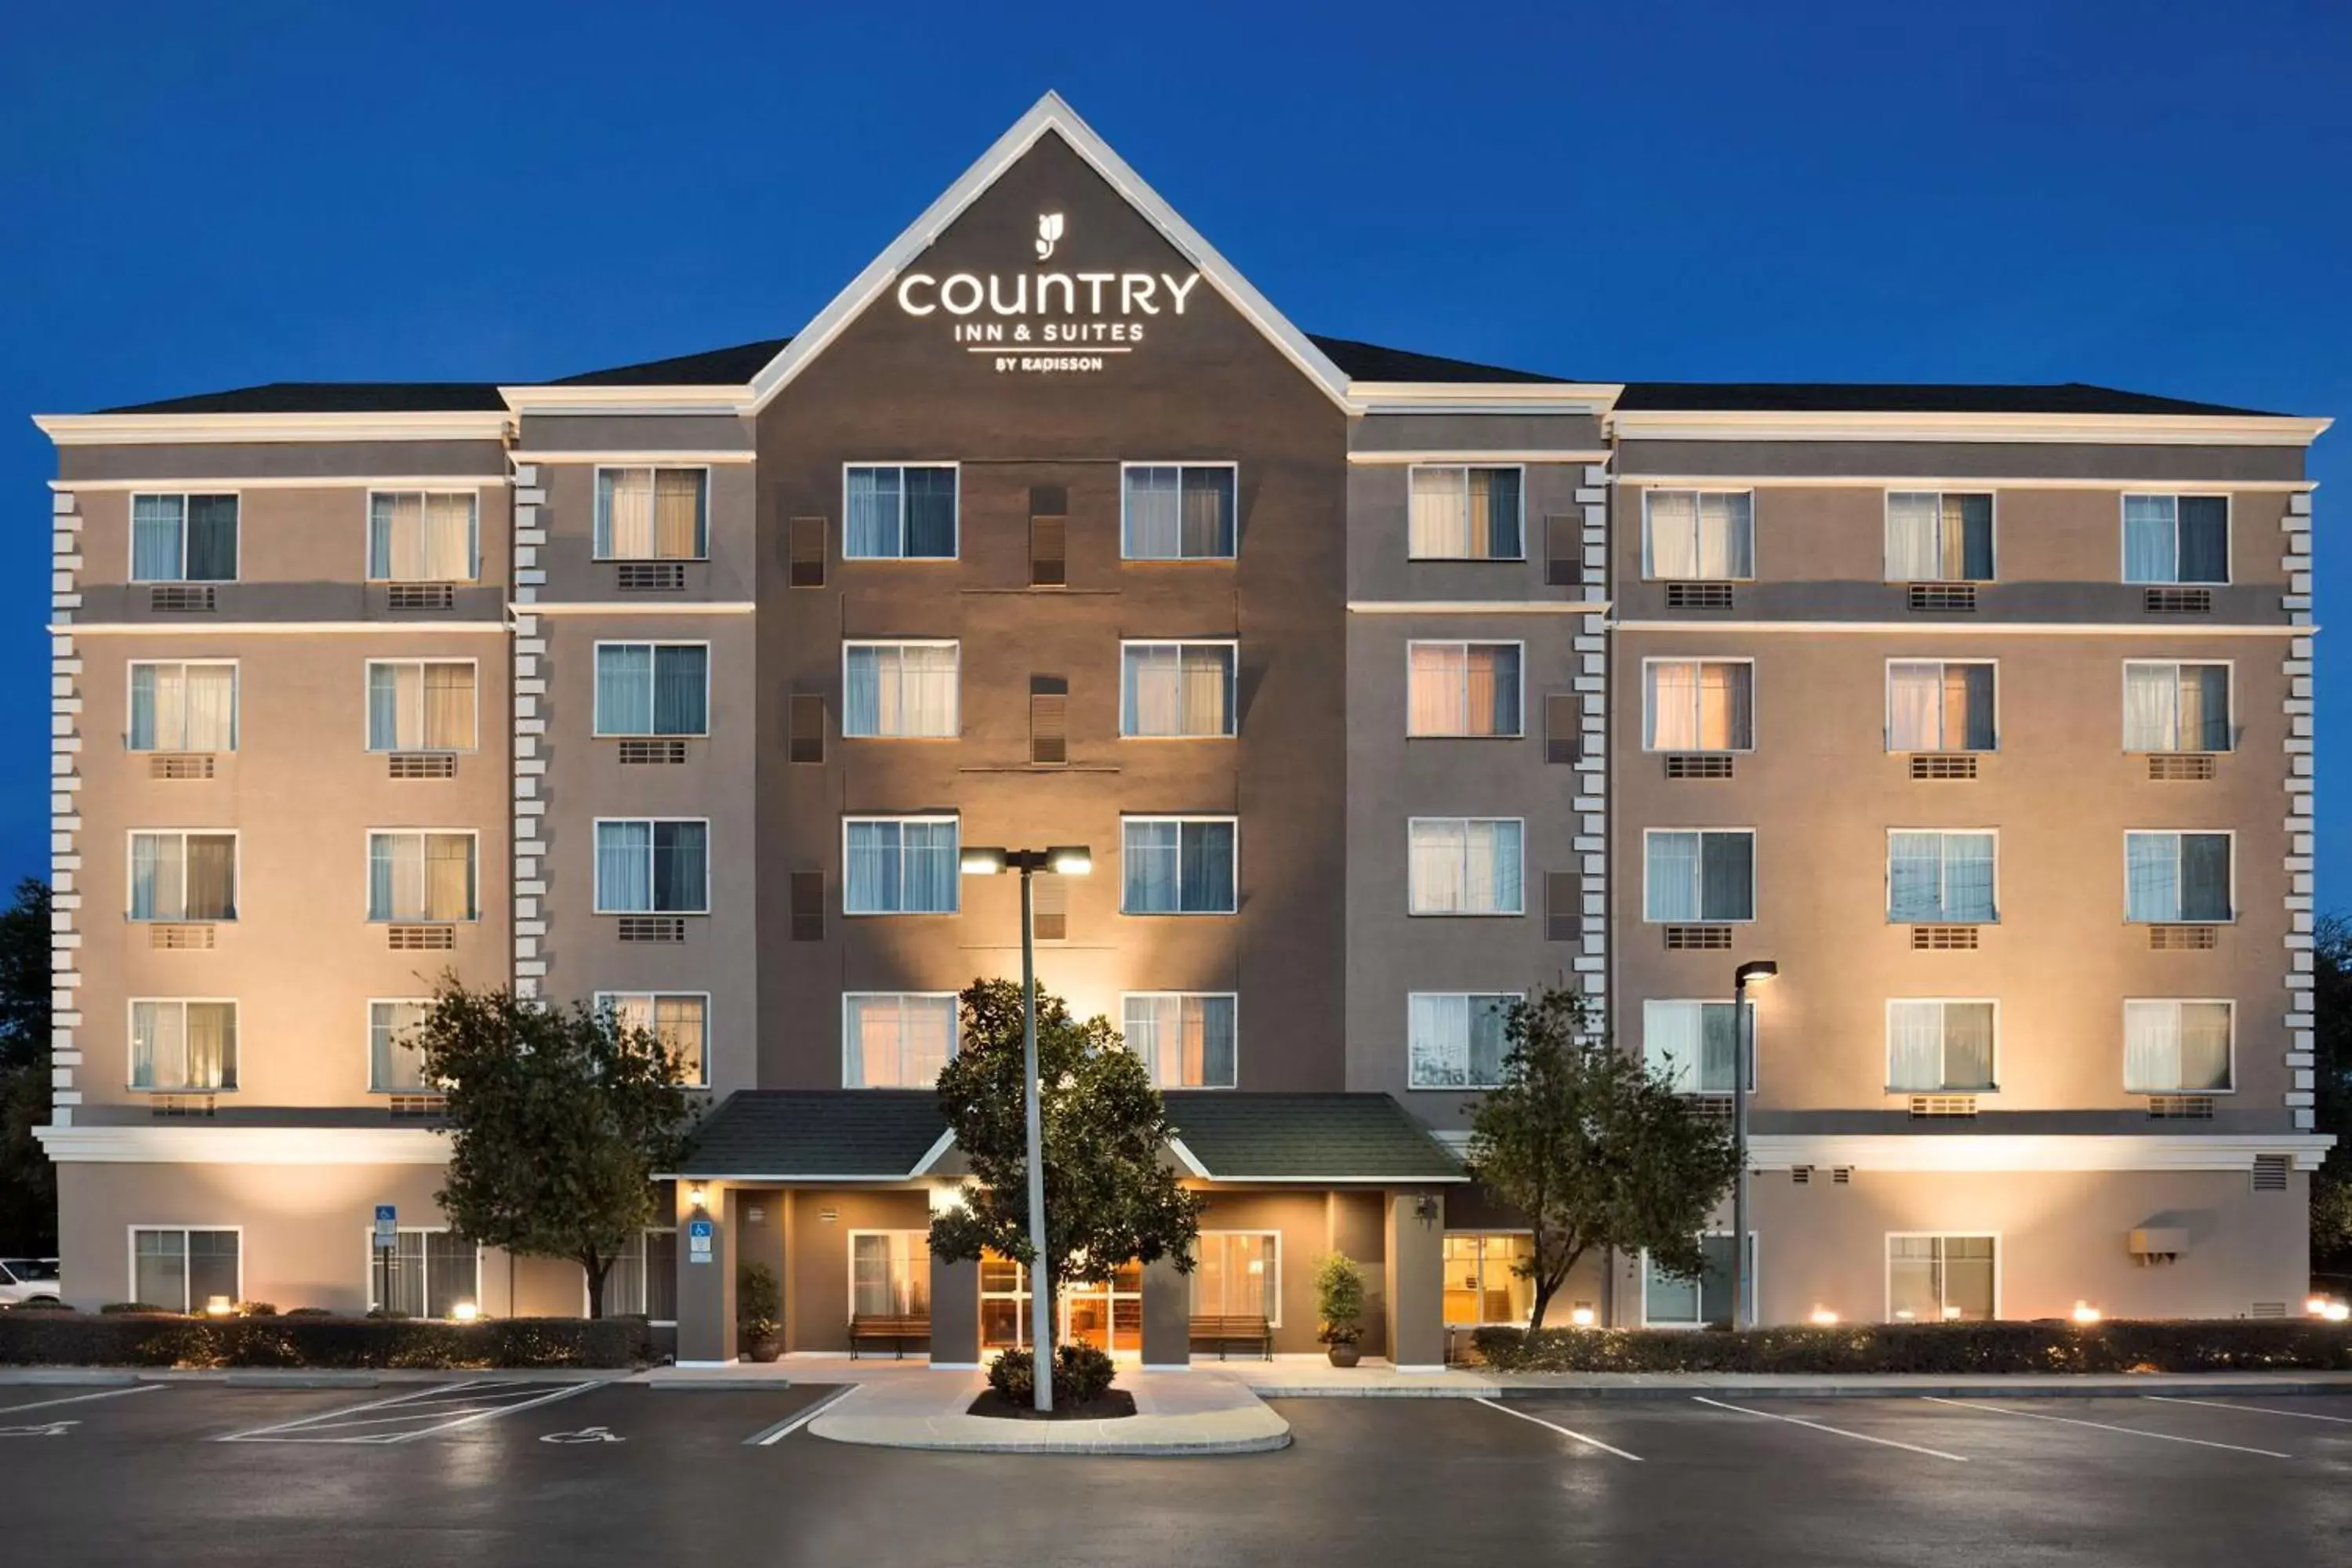 Property Building in Country Inn & Suites by Radisson, Ocala, FL